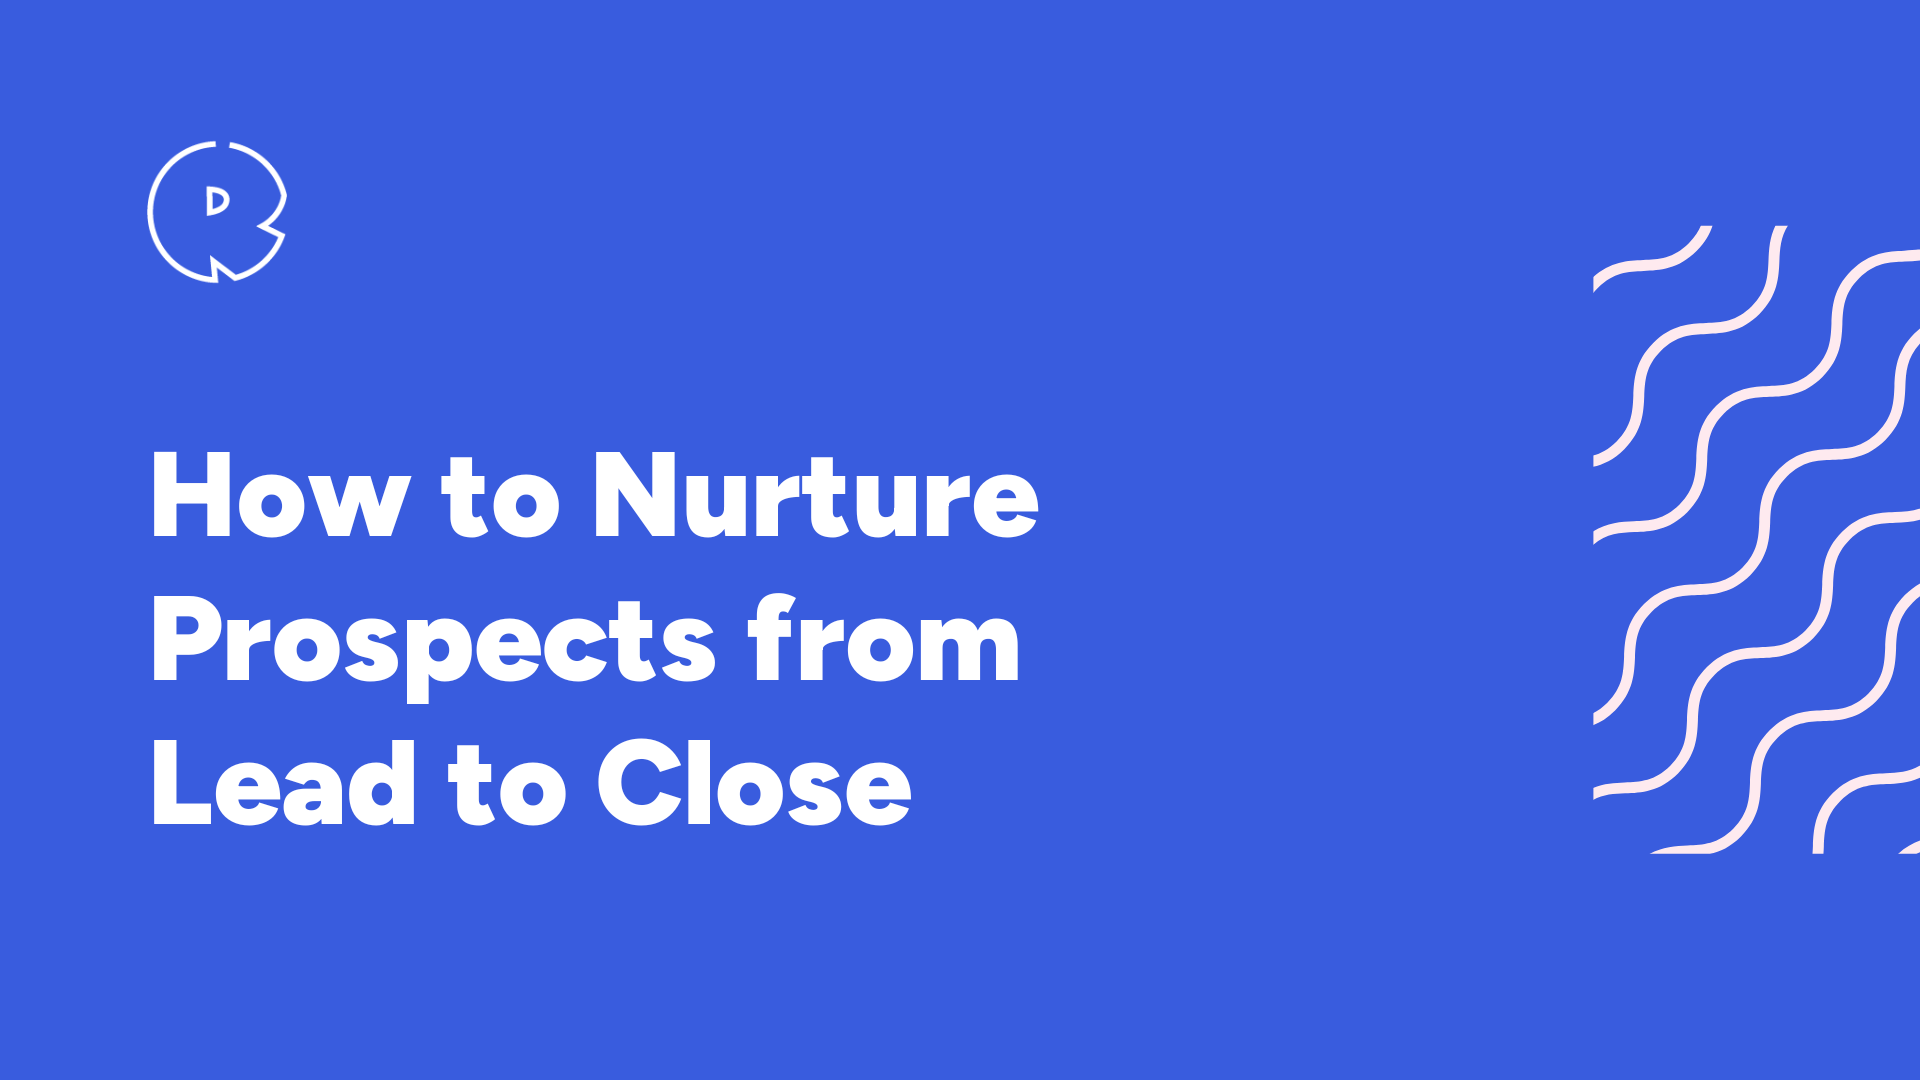 How to Nurture Prospects from Lead to Close